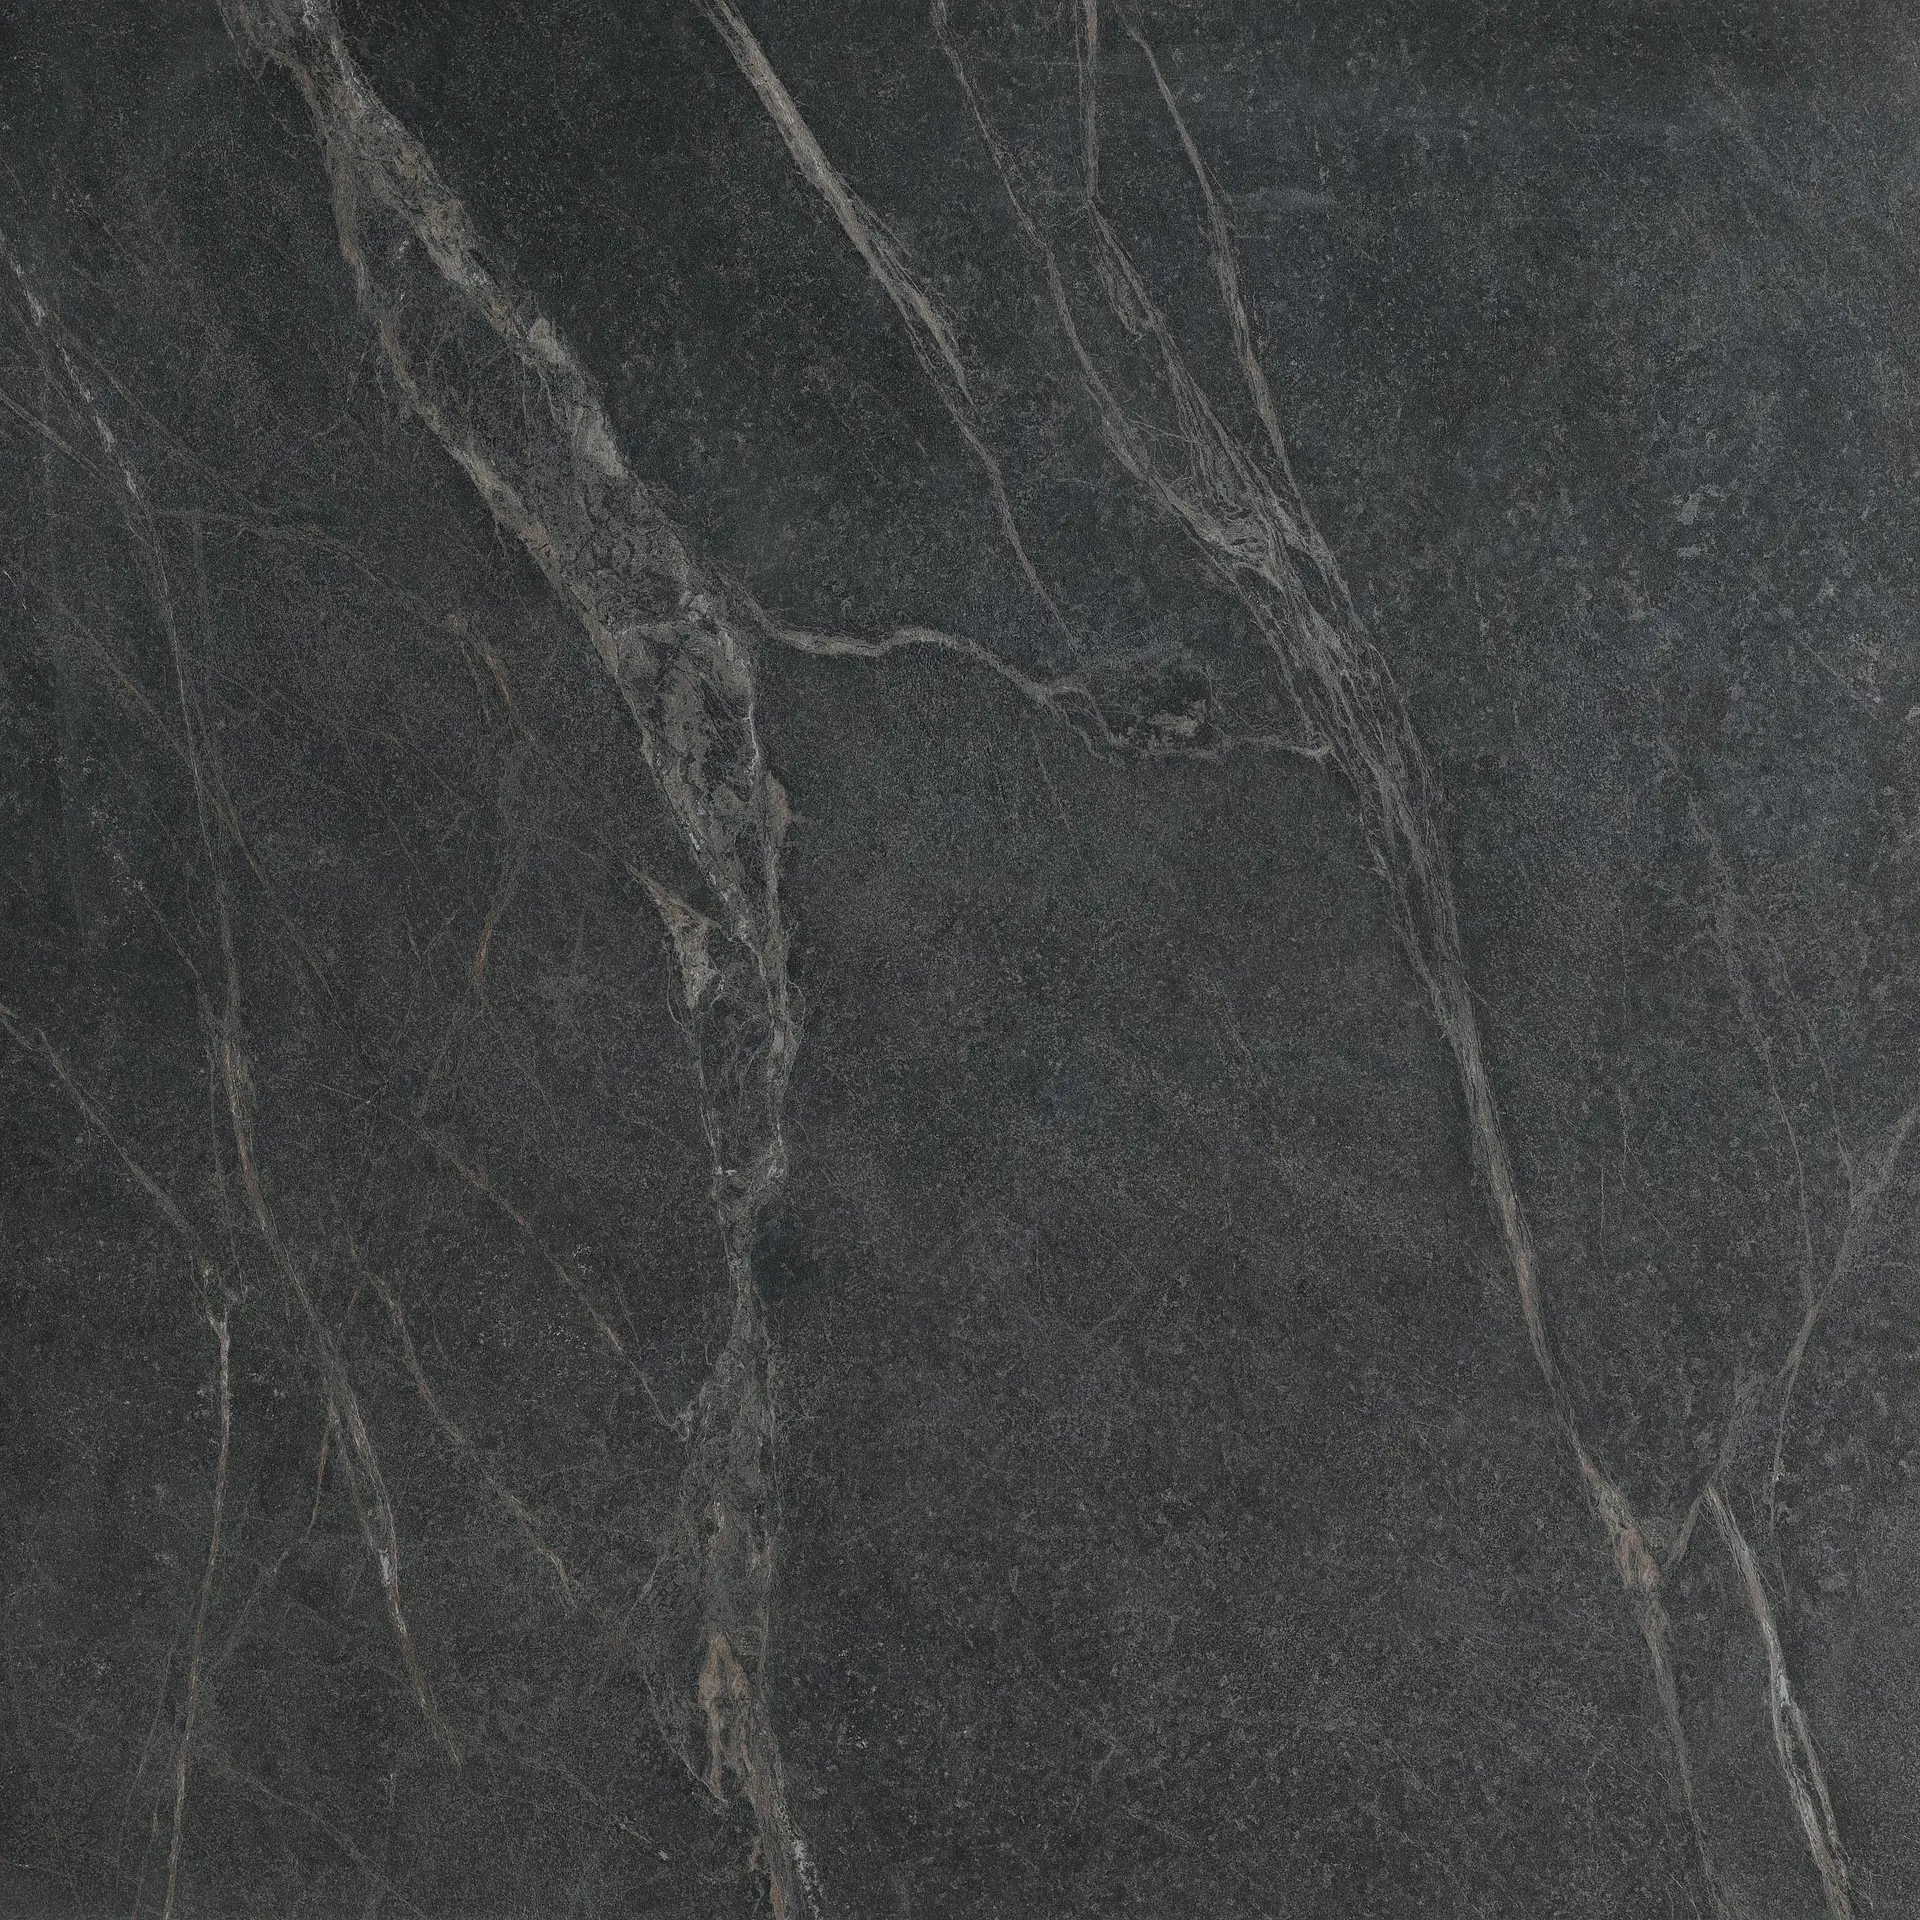 Soap Grey 60x120 - Collection Soap Stone by Cercom